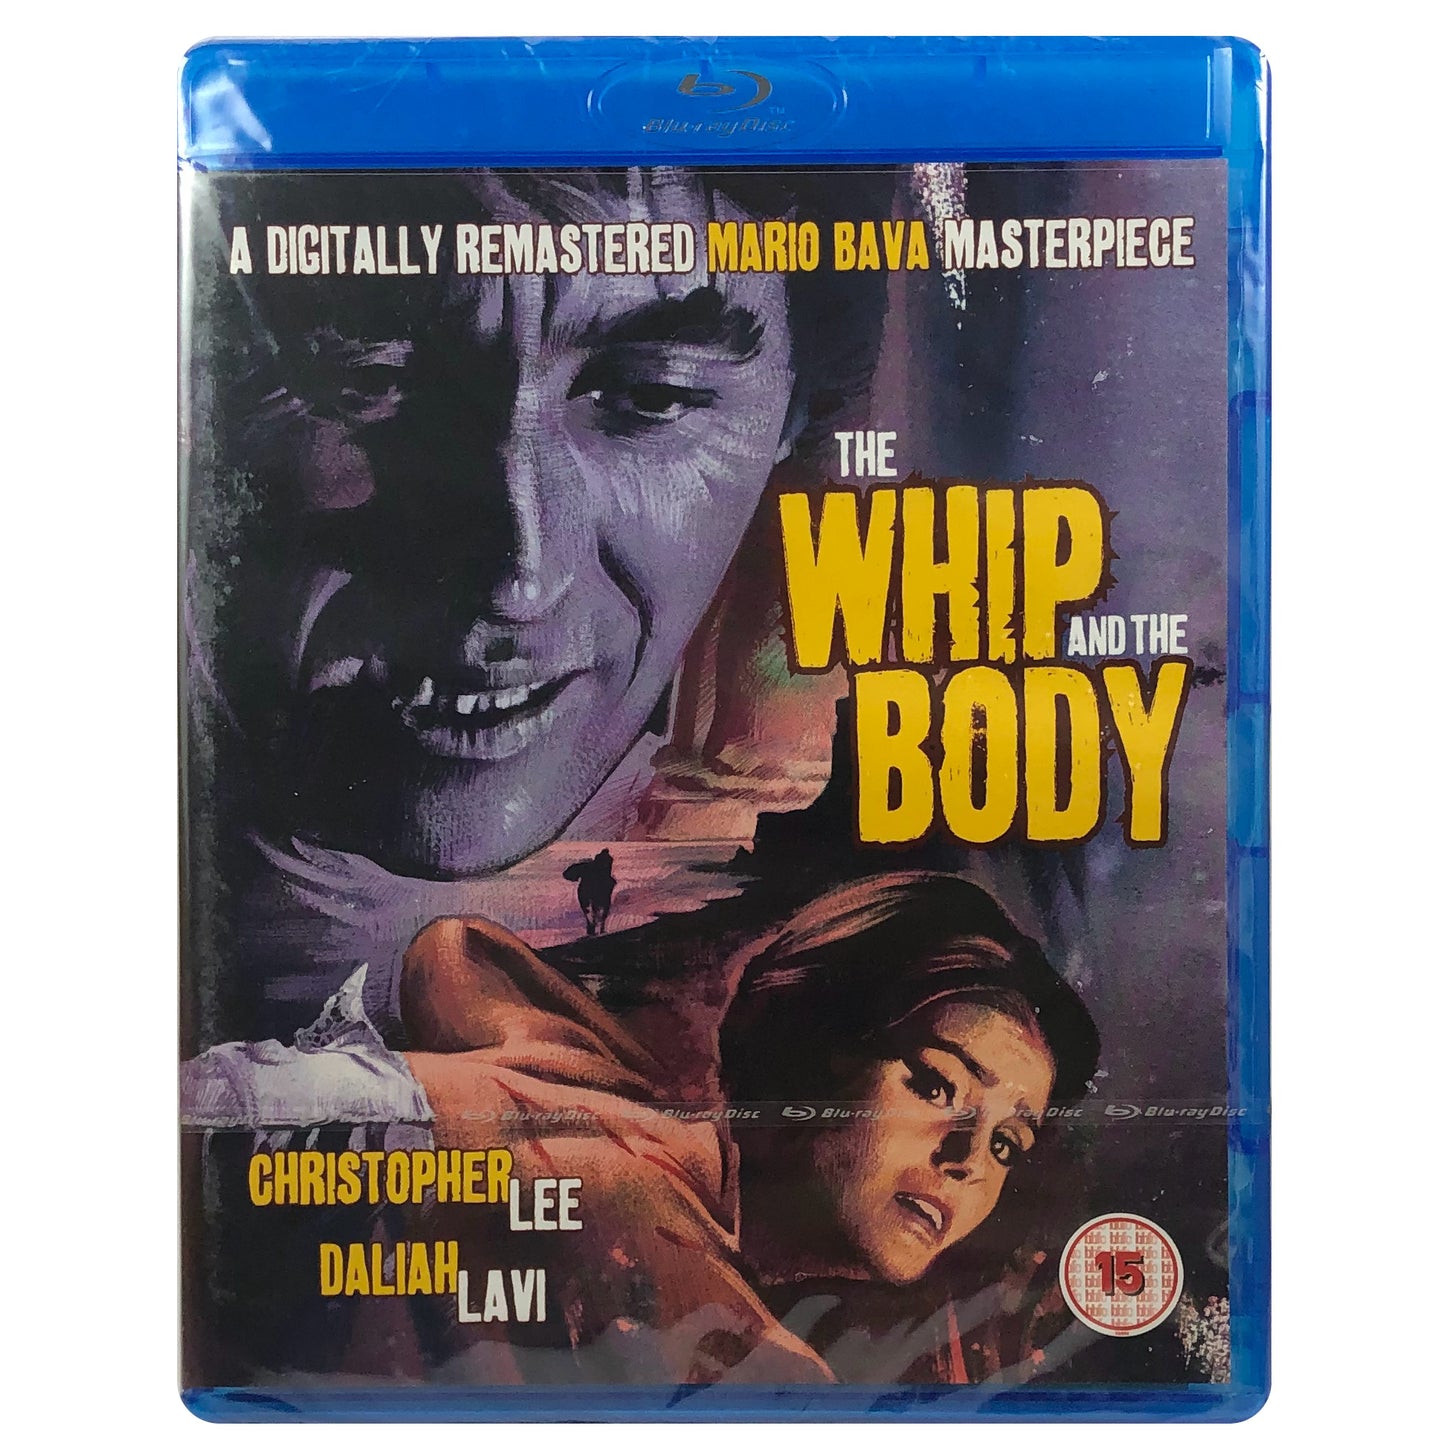 The Whip and the Body Blu-Ray